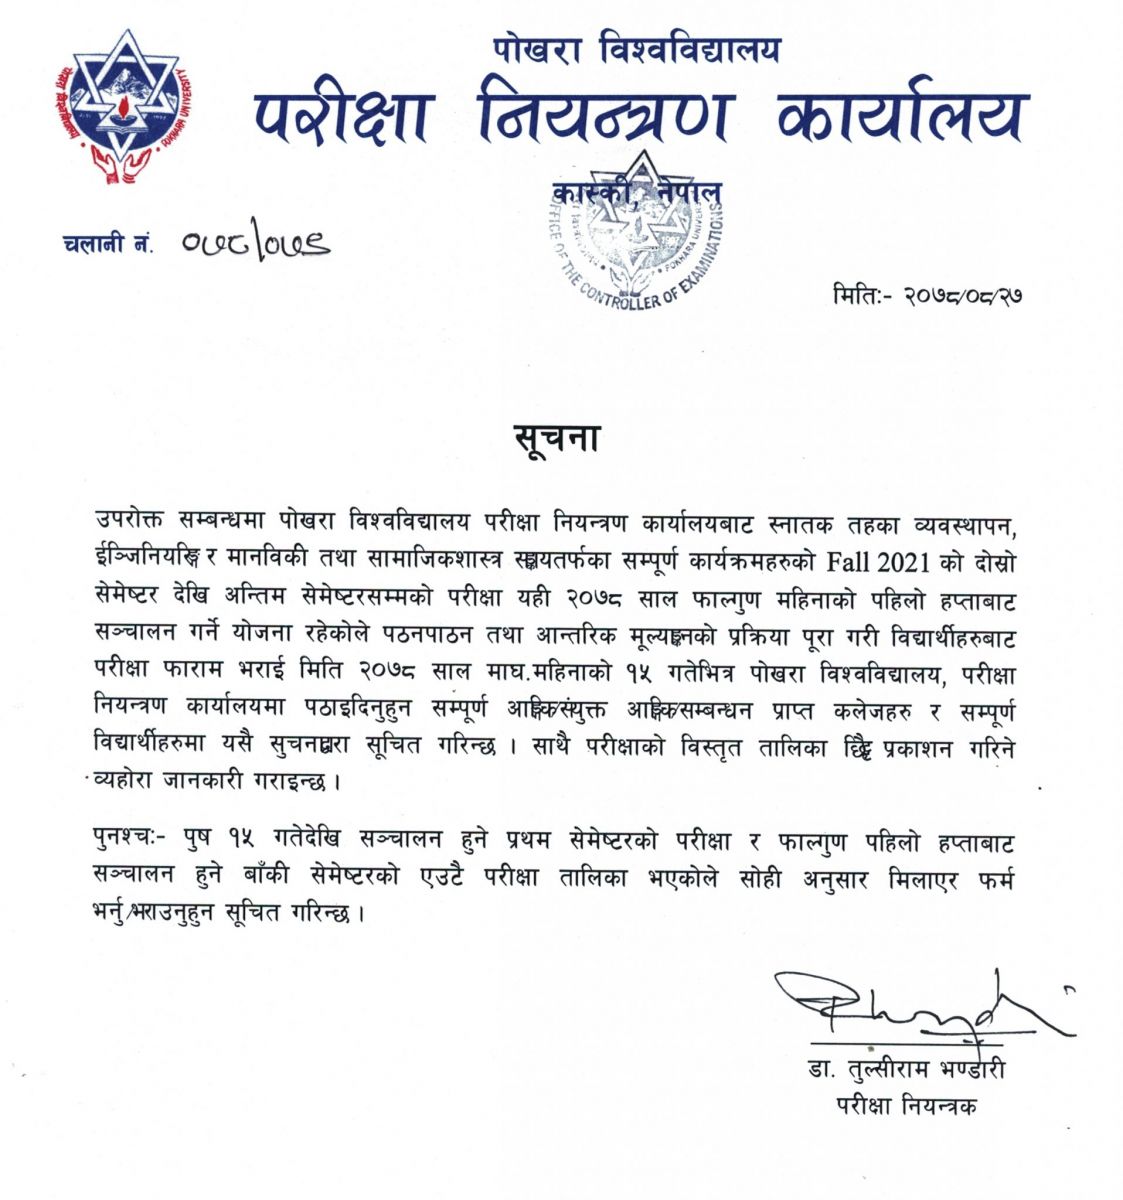 Pokhara University publishes form fill up notice for Bachelor exams of Fall 2021